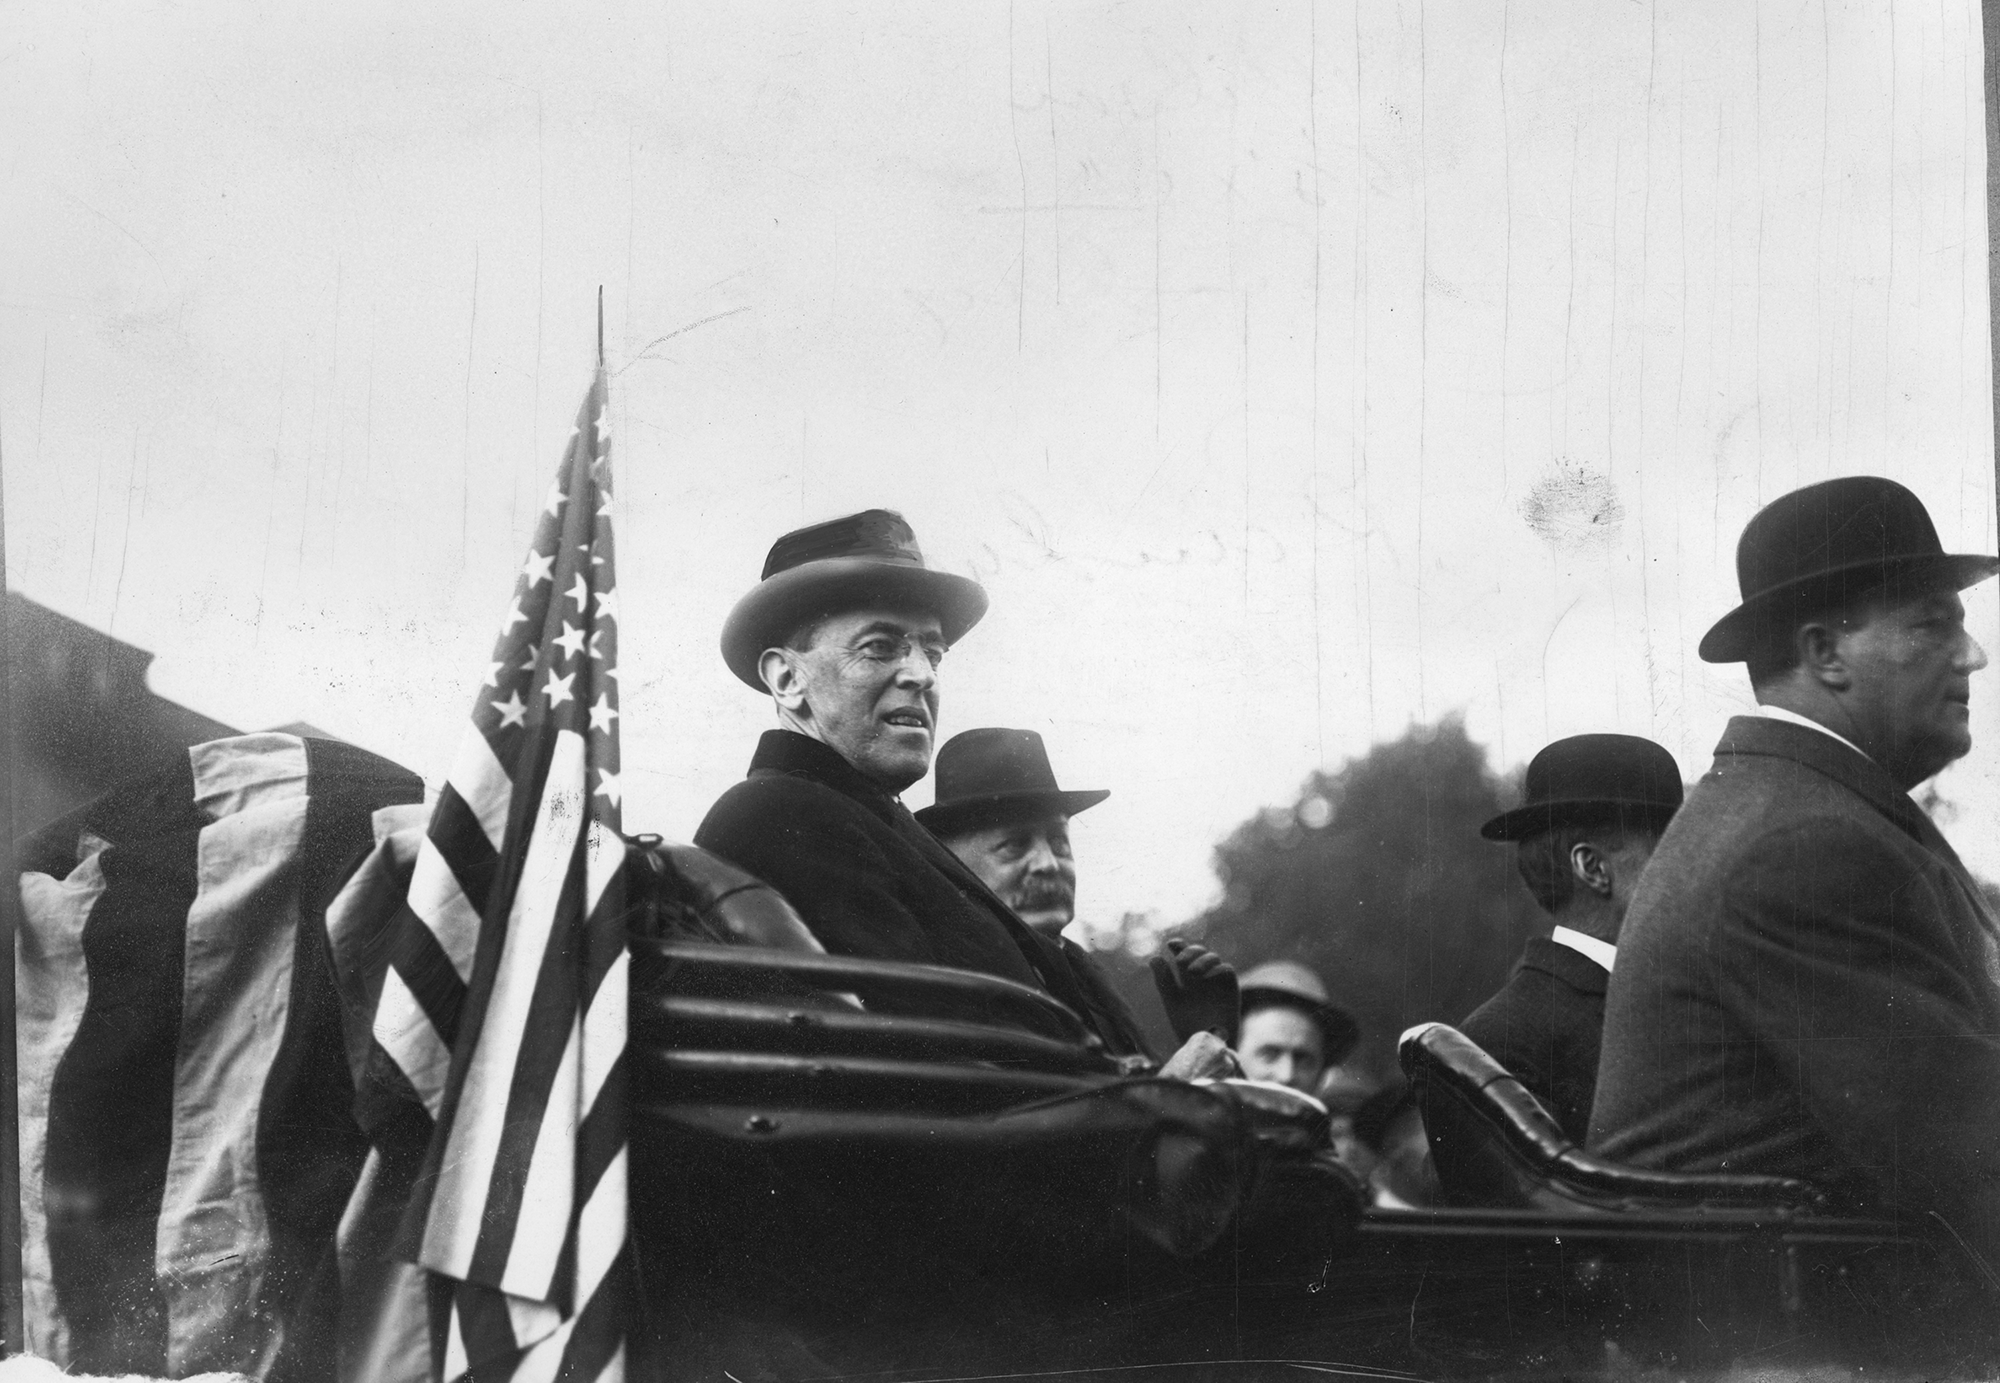 President Woodrow Wilson seated in the back of an open-top automobile with other men.